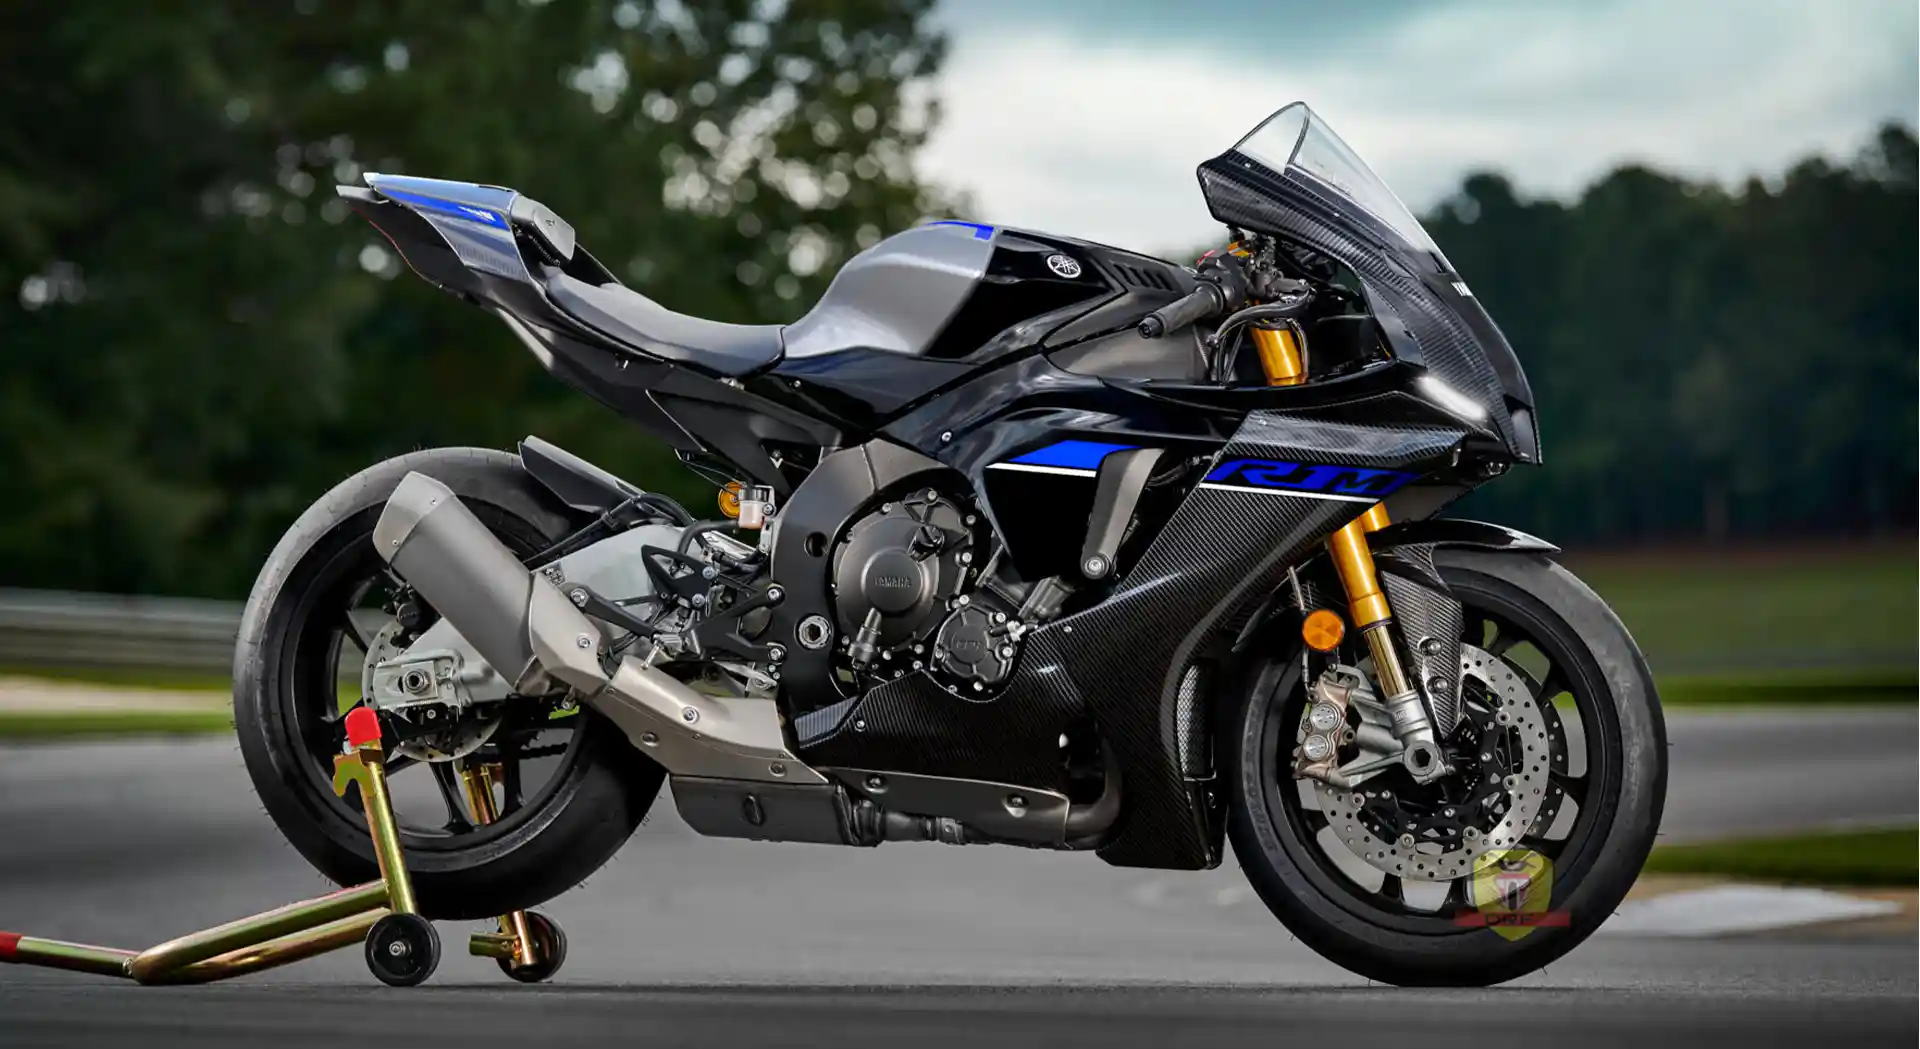 Say Goodbye to The Yamaha R1 Superbike, Production Will Stop in 2025